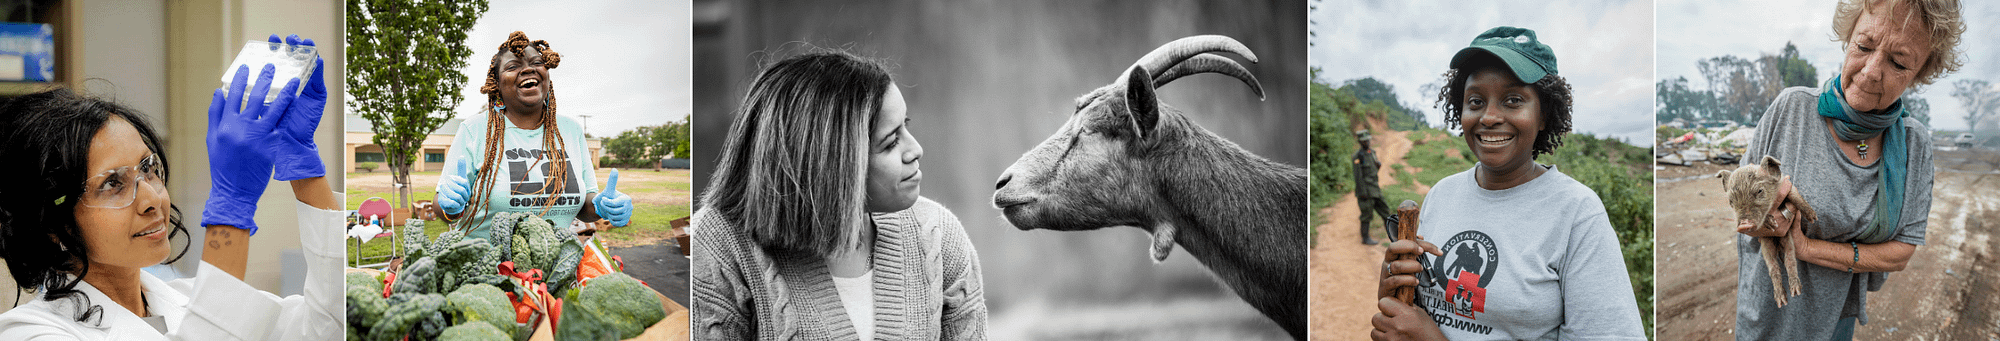 The Unbound Project: Celebrating Women on the Frontlines of Animal Advocacy Worldwide